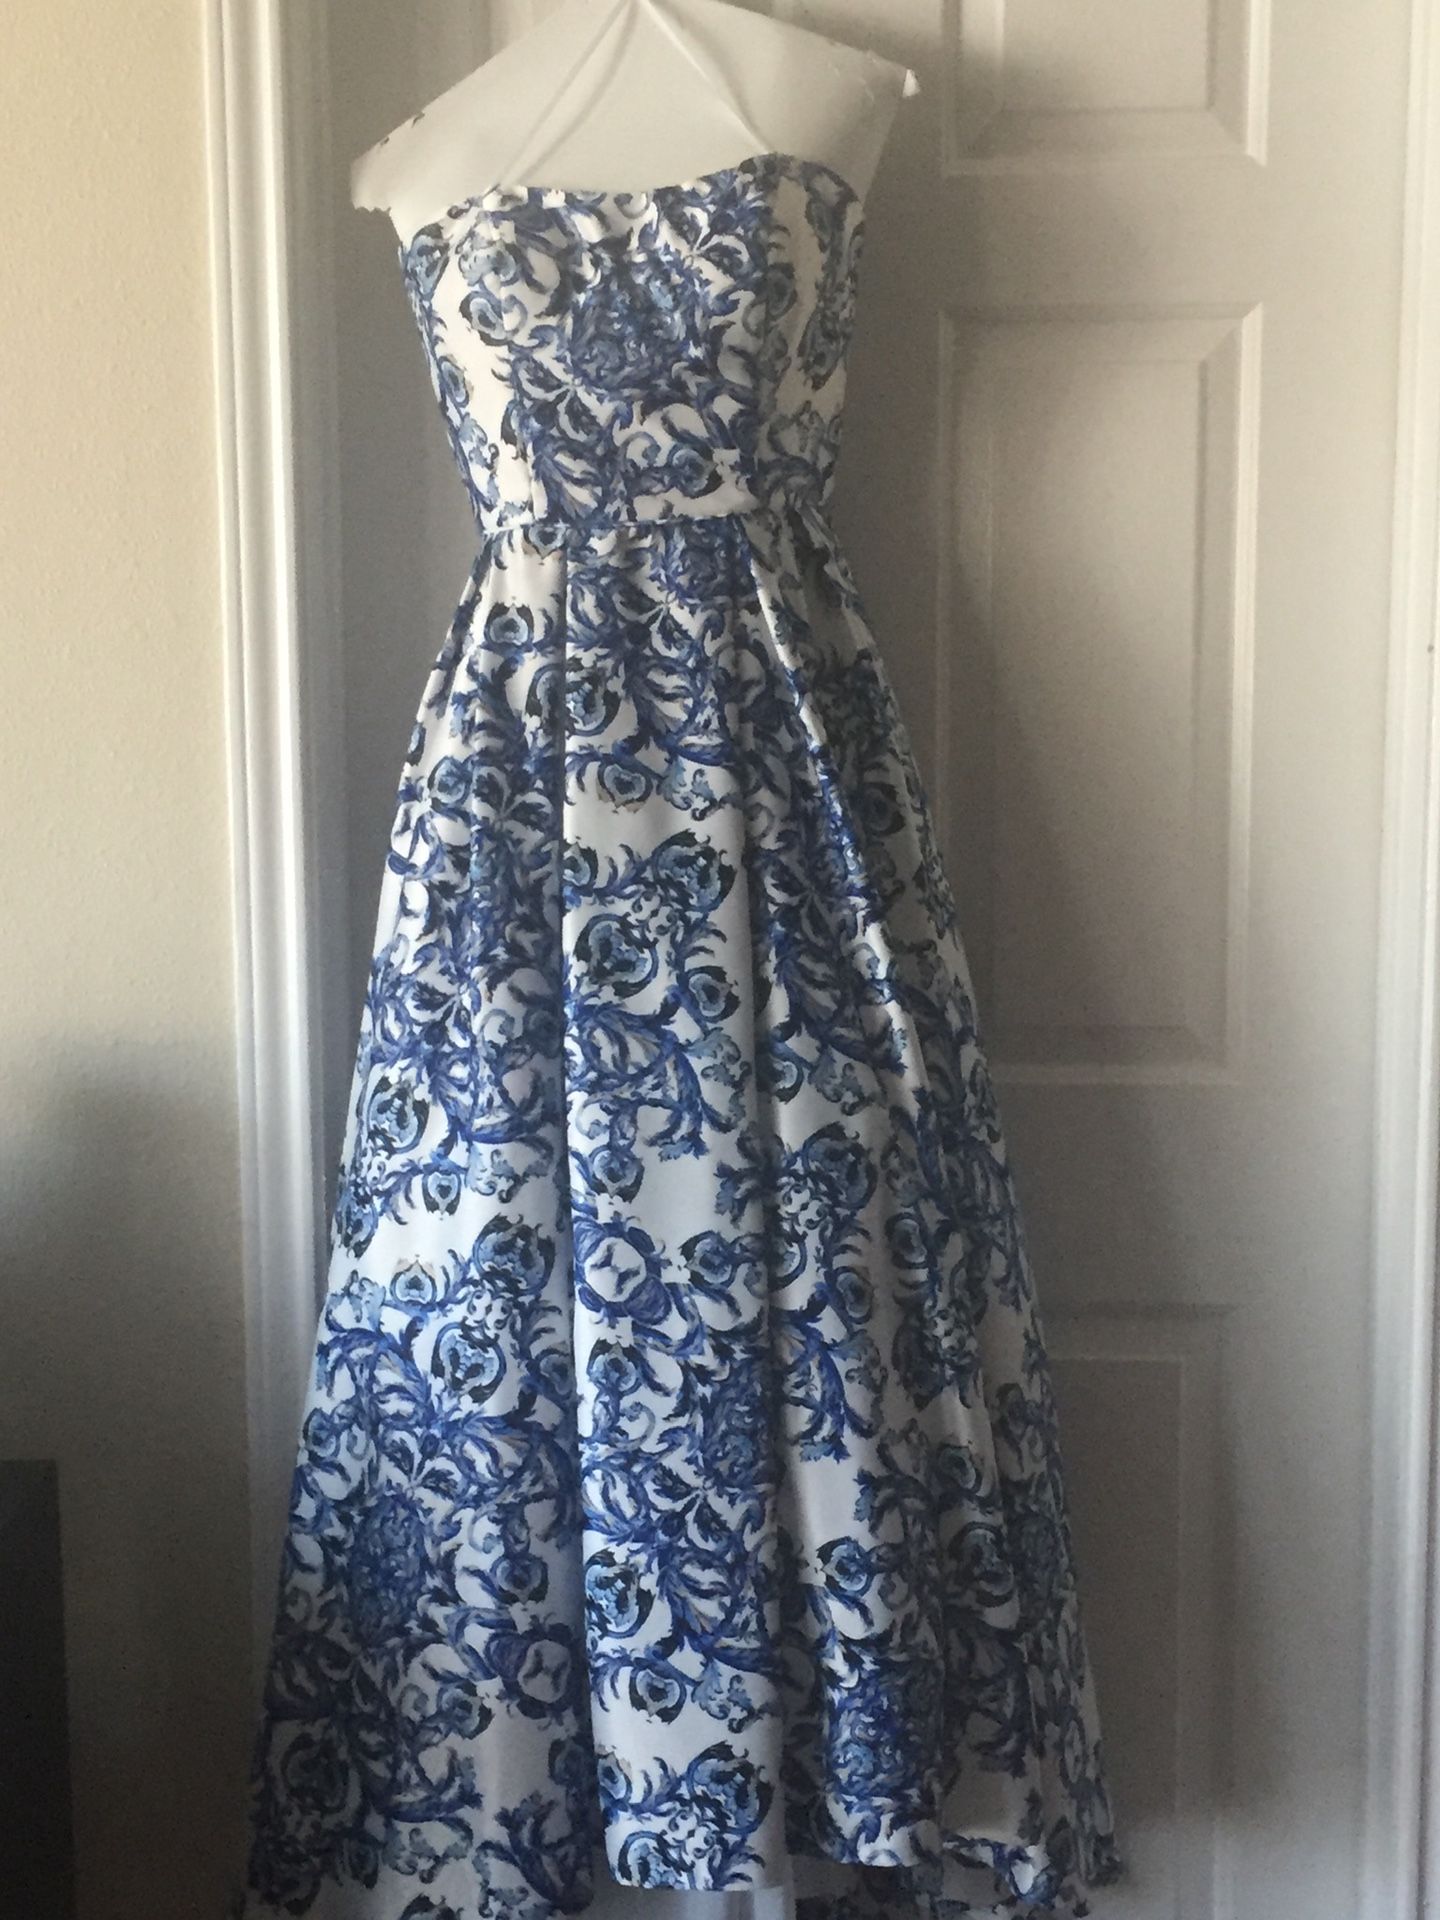 Stunning Party Dress. For Wedding or Prom. Size 8